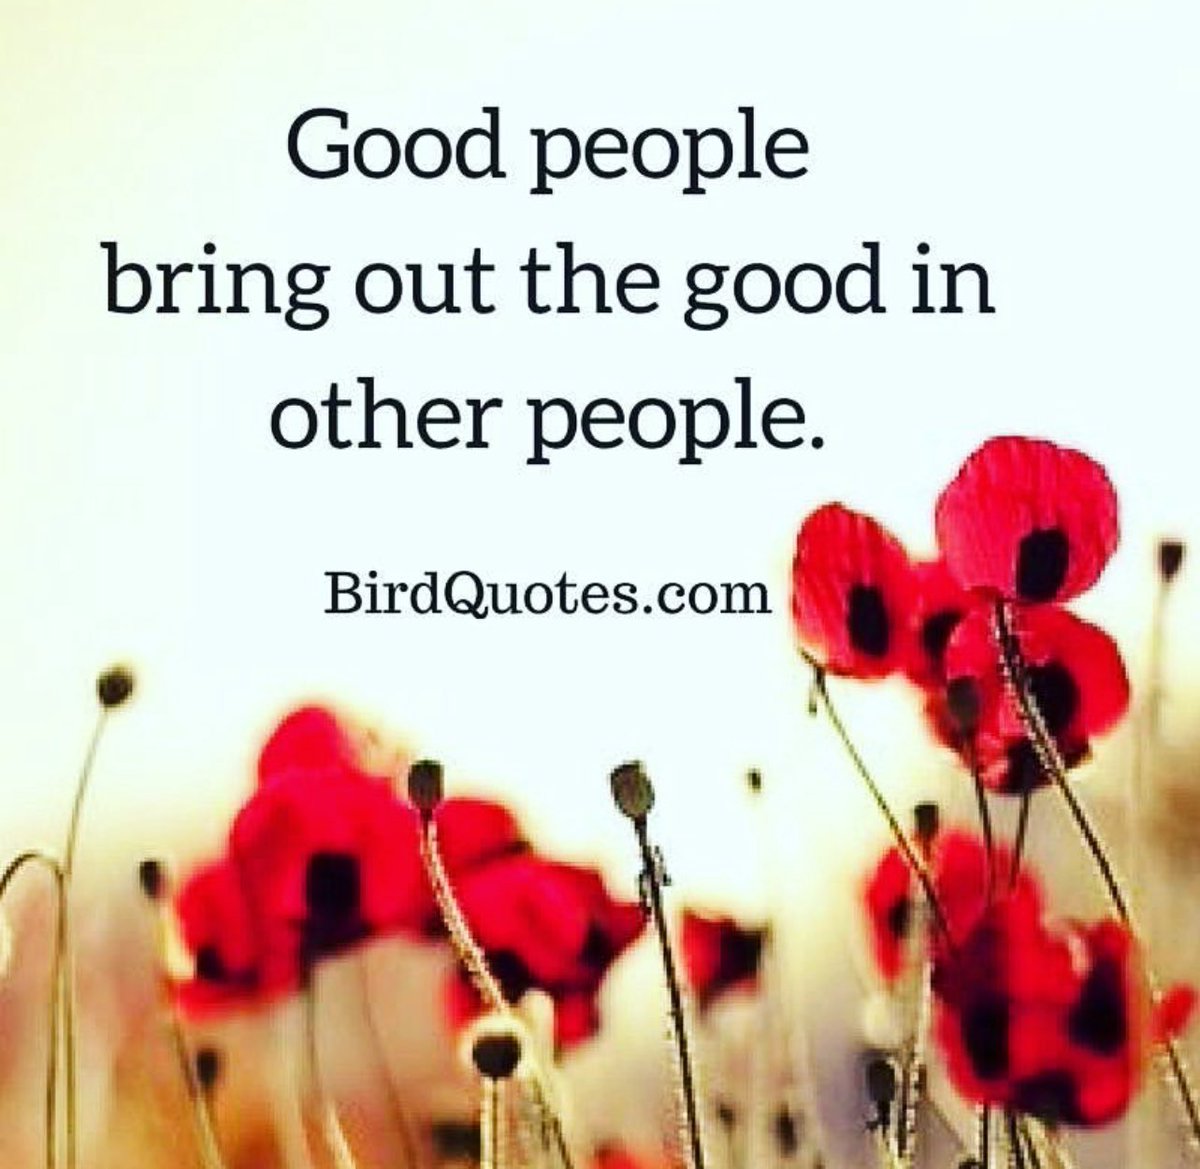 Thursday Friendly Reminder… Good people bring out the good in other people. #ThankfulThursday 🙌❤️#KindnessMatters #ThursdayThoughts